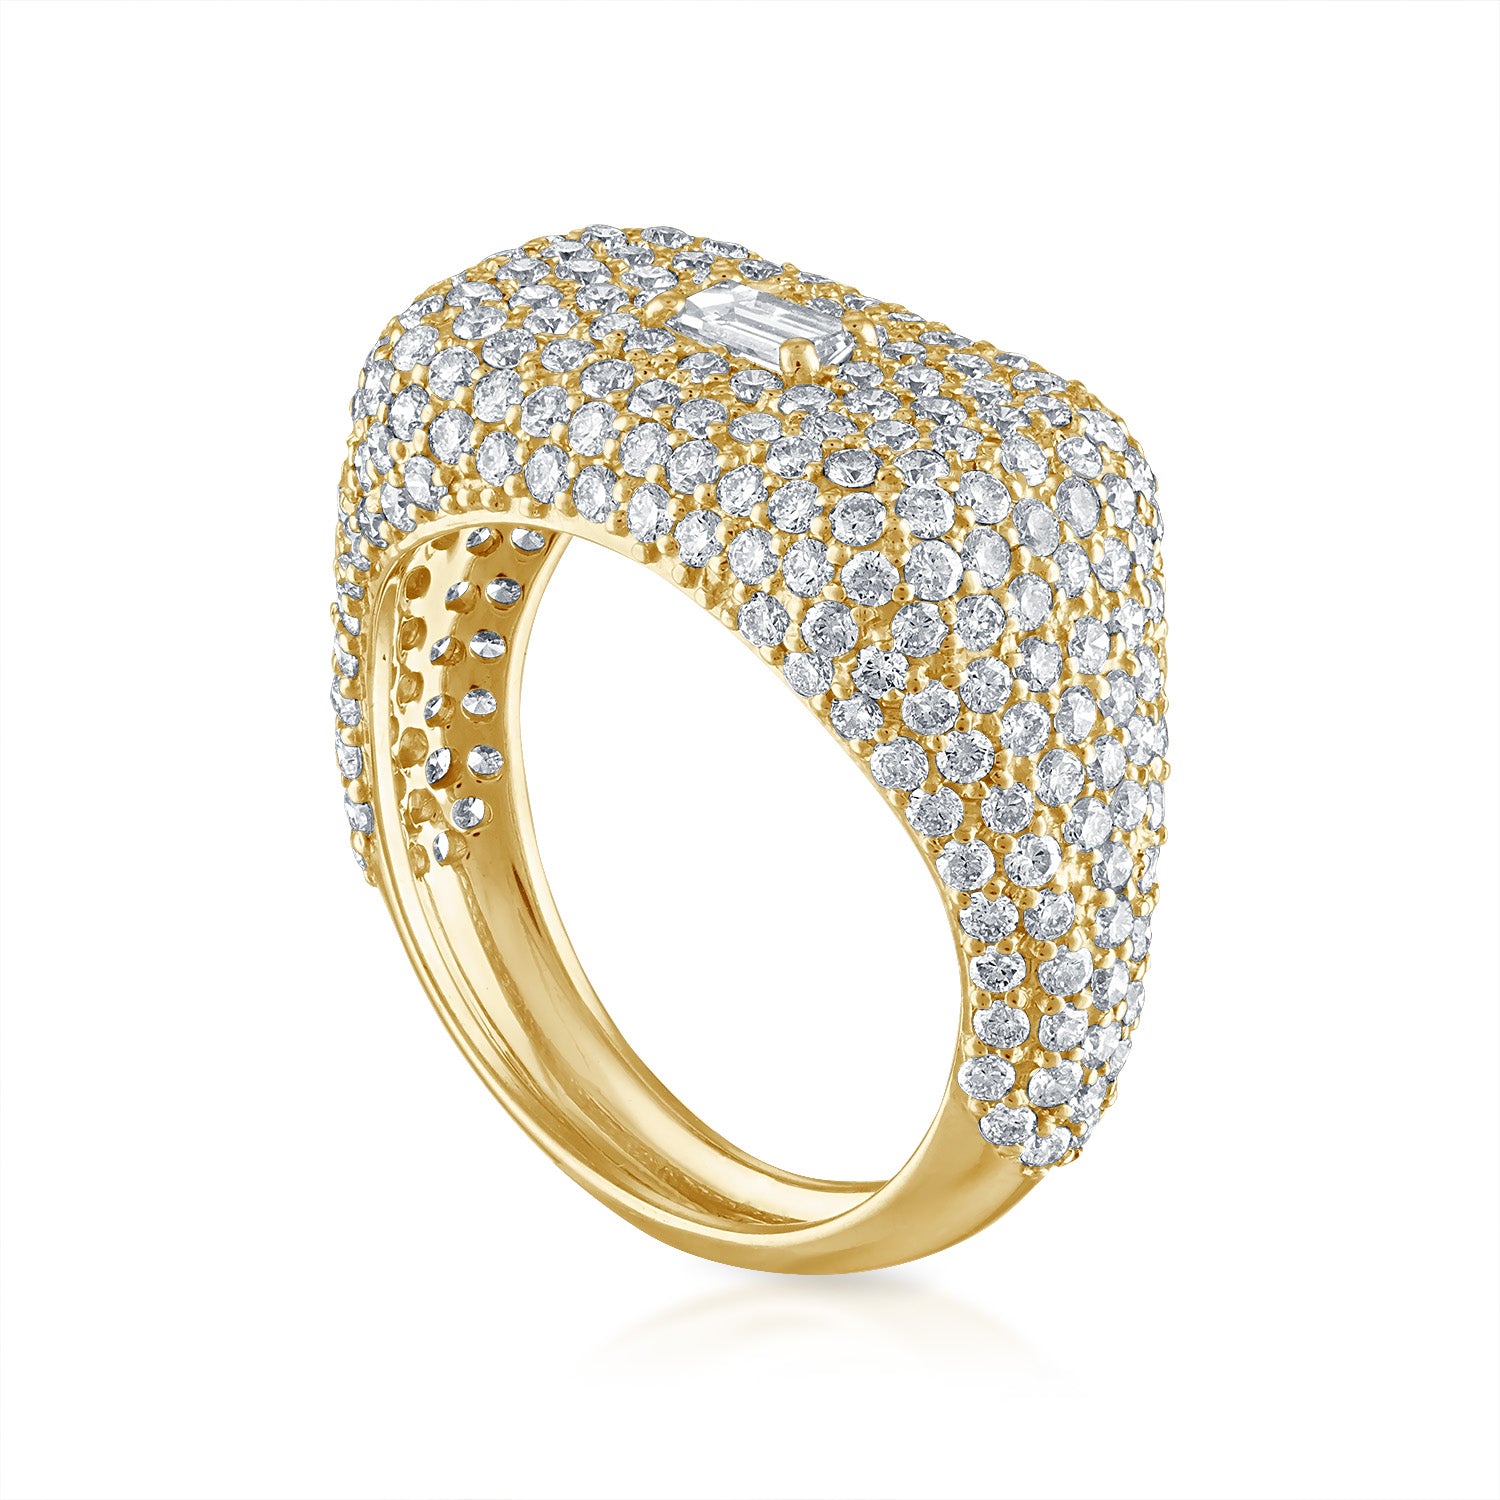 White Diamond Domed Signet Ring in Yellow Gold